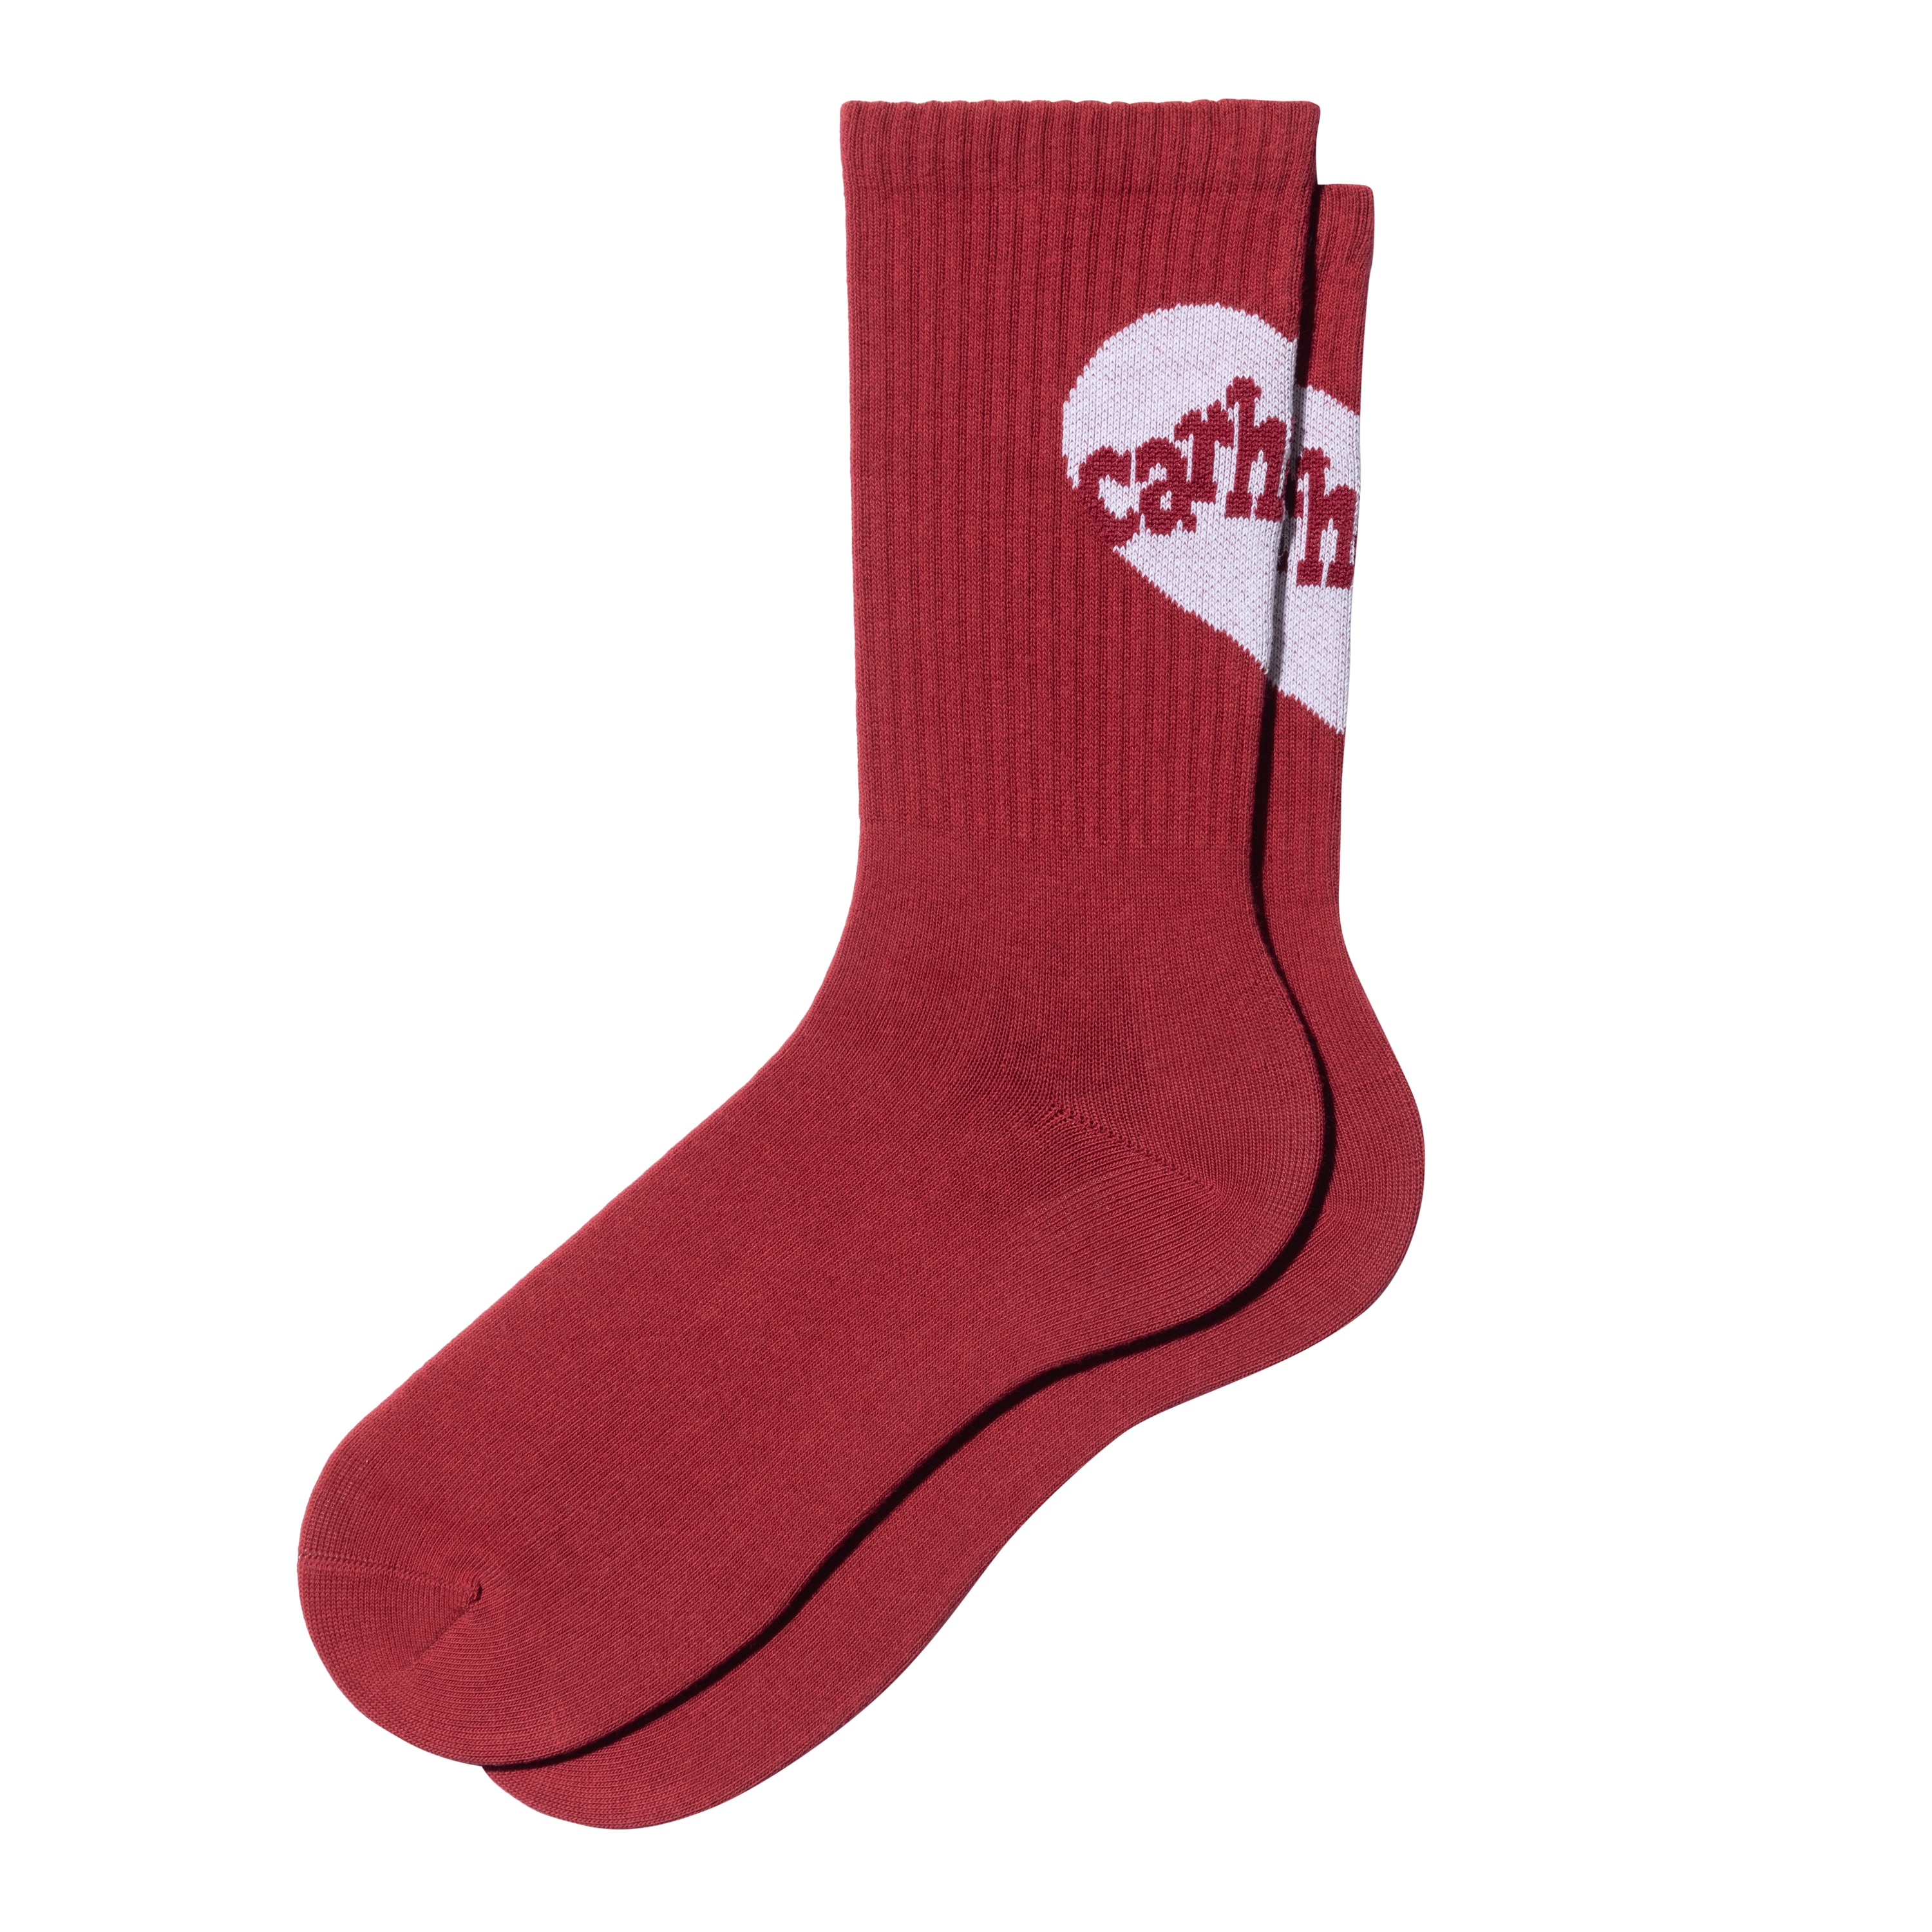 Carhartt WIP Amour Socks in Red